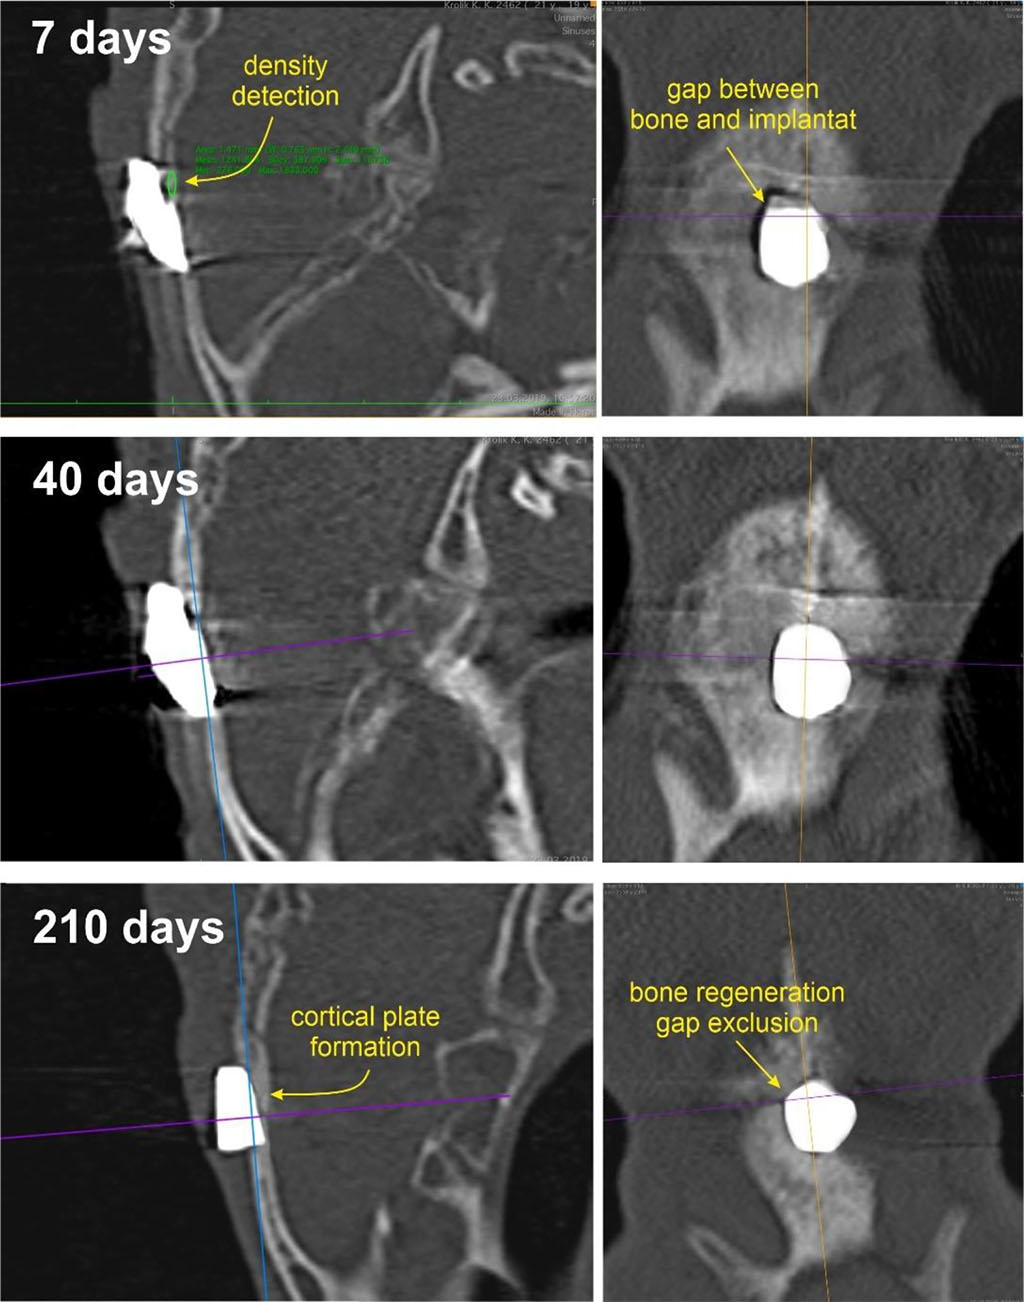 Figure 2. Computed tomography of the skull of a rabbit with a bioceramic implant in the defect zone on days 7, 40, and 210 after surgery.